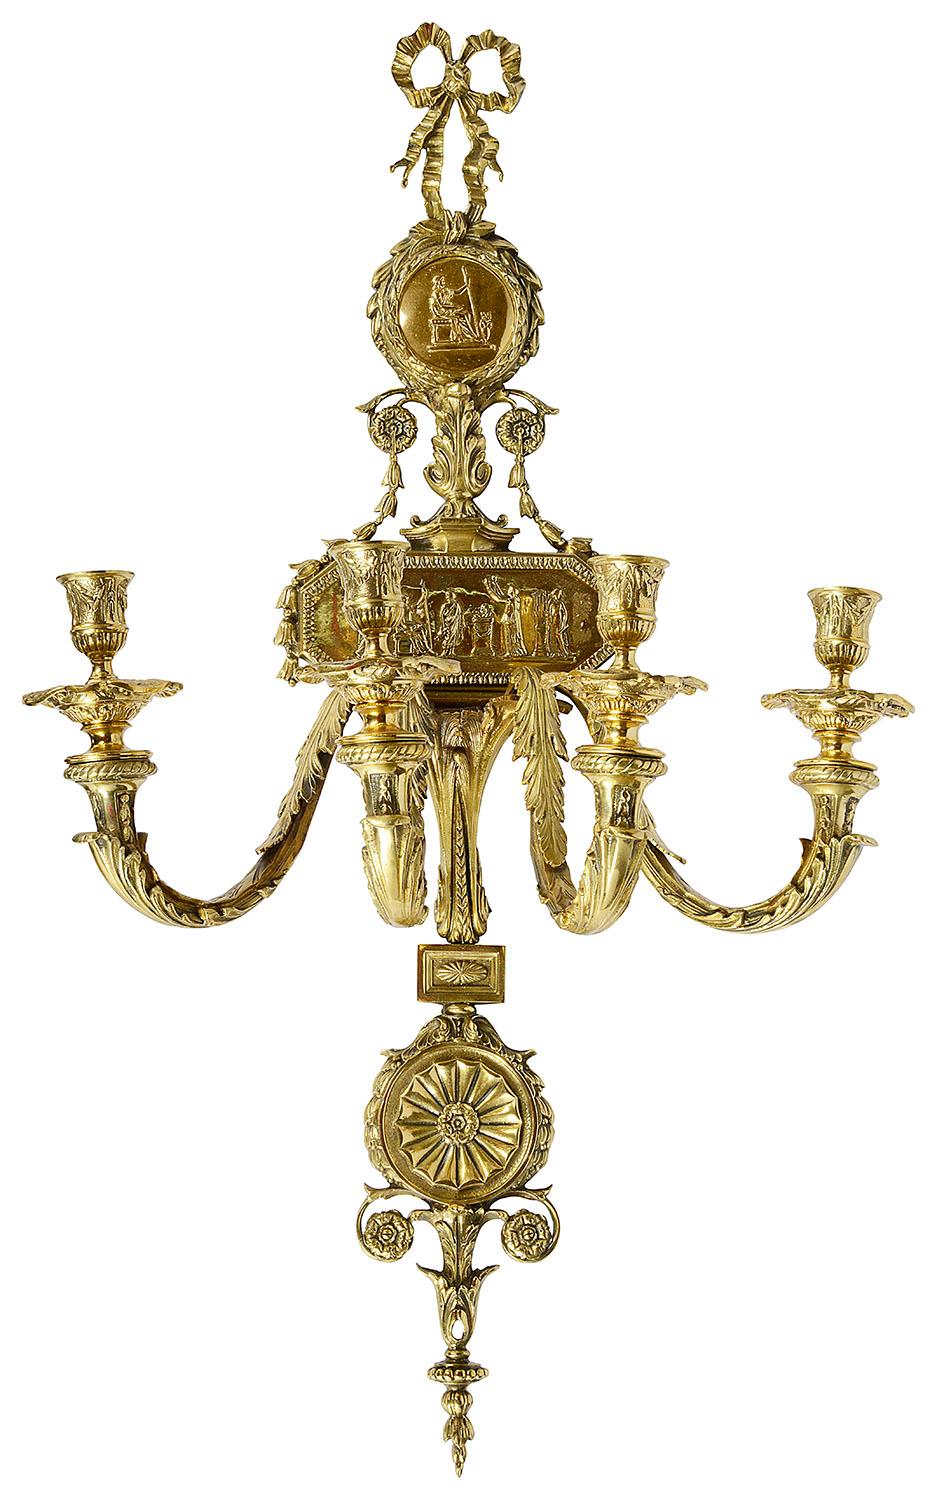 A very impressive pair of late 19th century French ormolu four branch wall lights, each with classical scenes depicted in the plaques, scrolling foliate, and ribbon decoration.